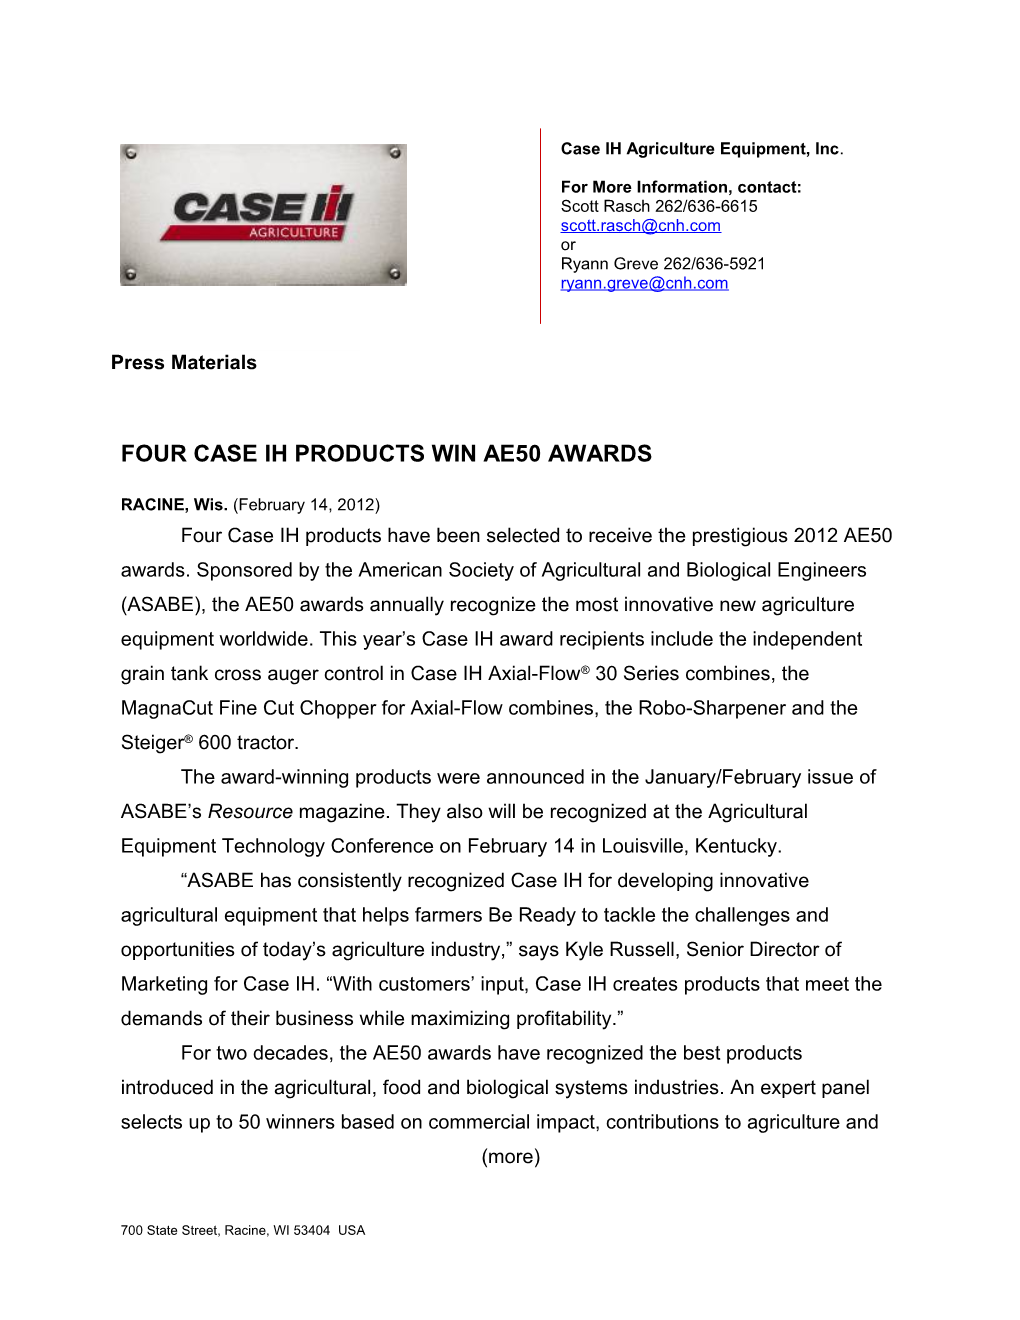 2012-2-14 Four Case IH Products Win AE50 Awards FINAL